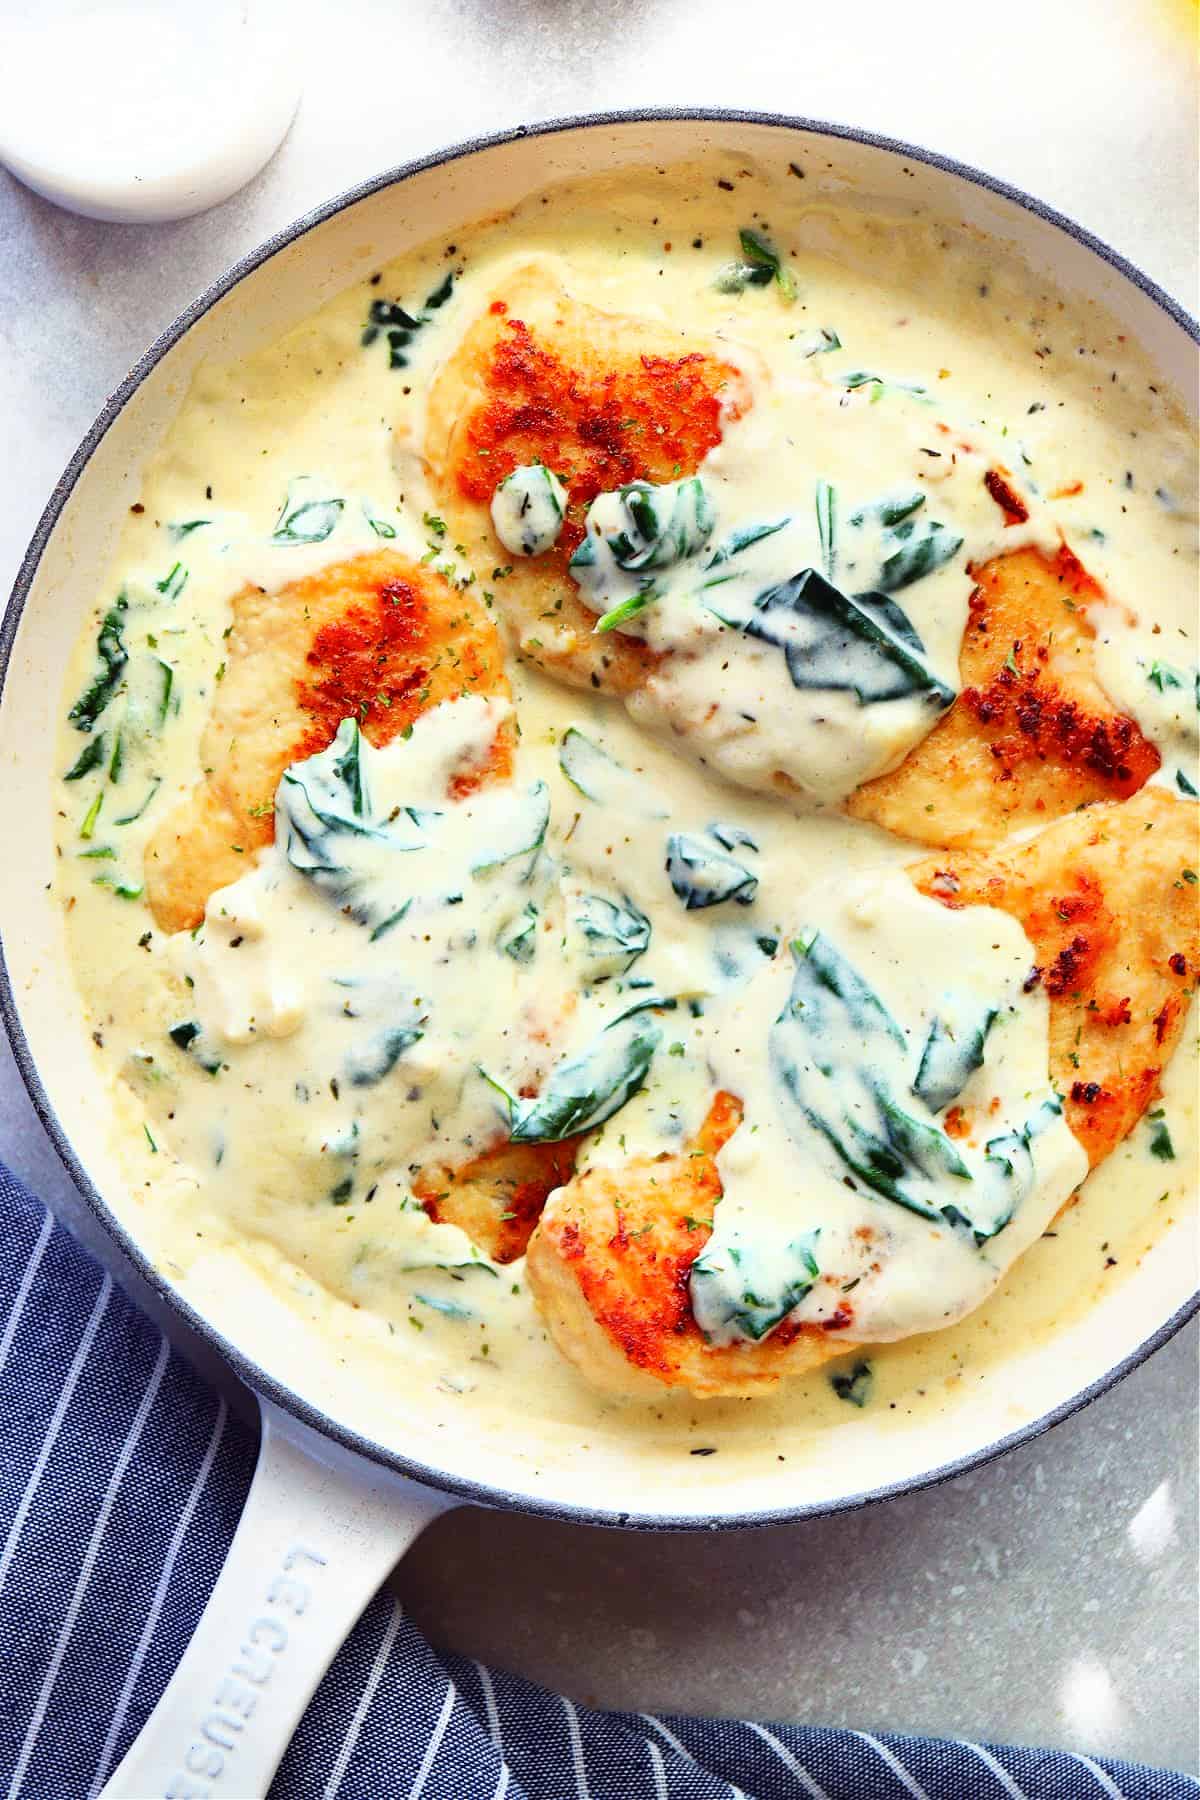 Three chicken breasts in a creamy sauce with spinach, in an enameled Le Creuset skillet.